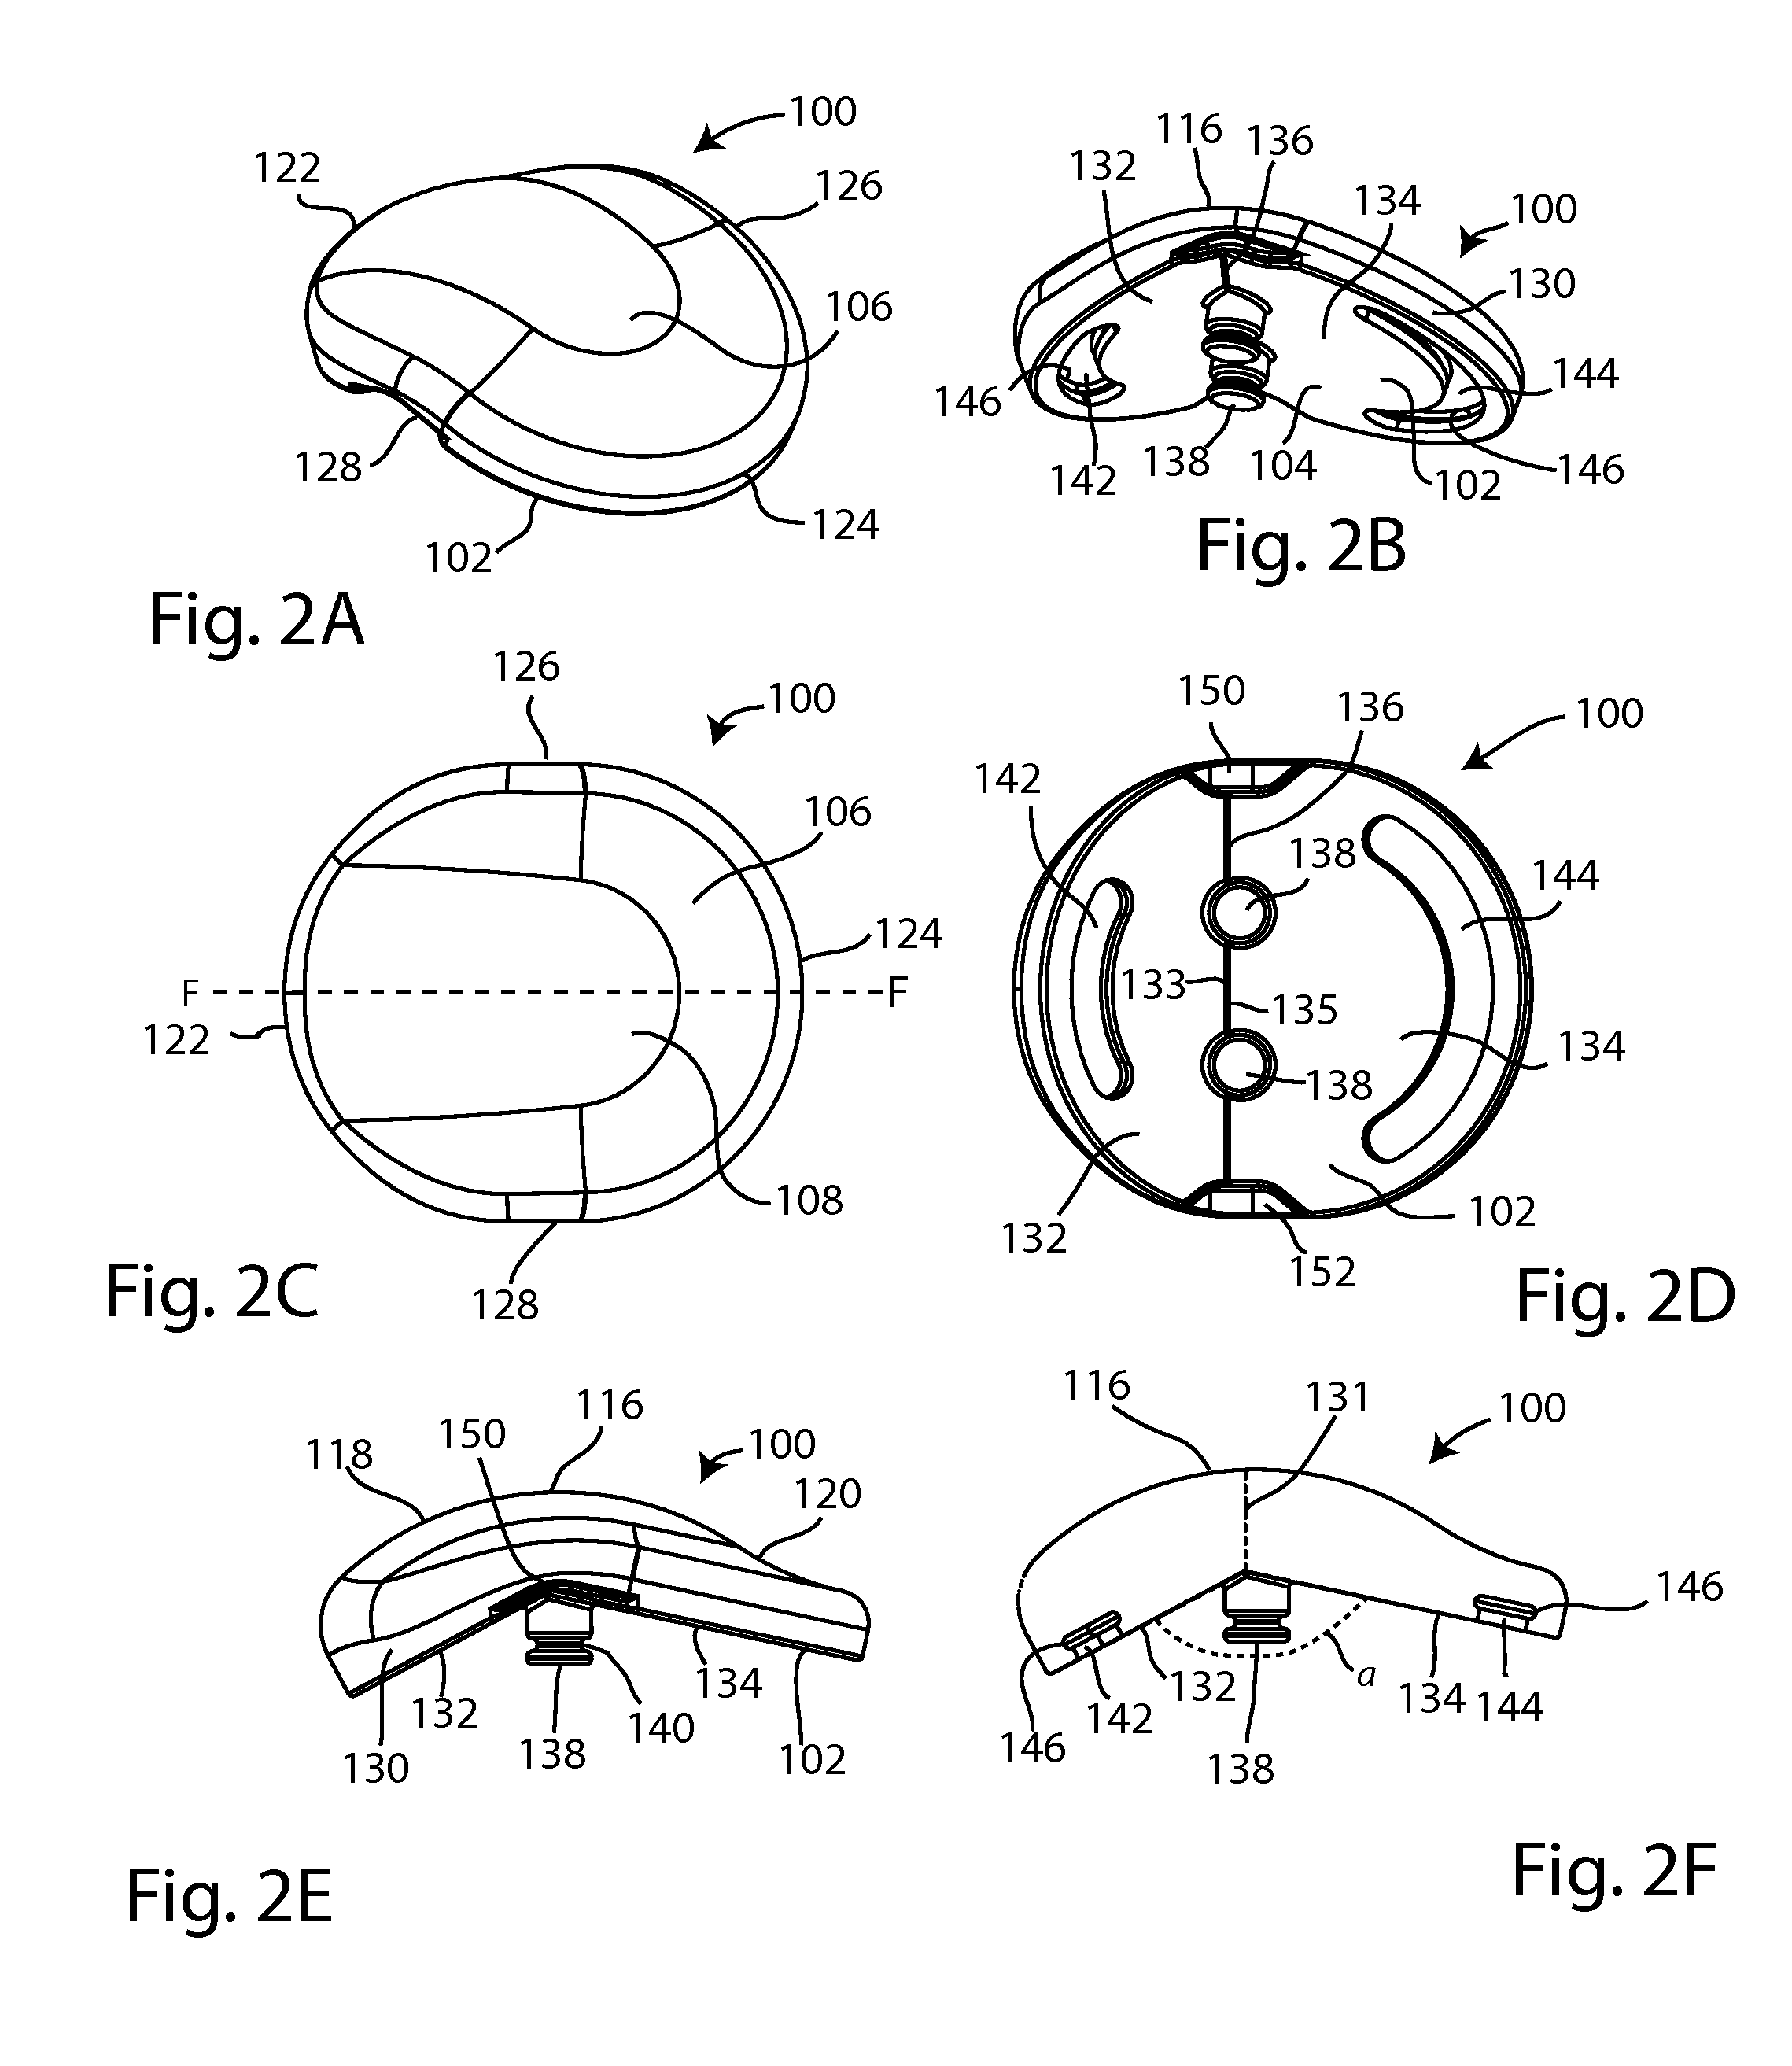 Patient Specific Implants and Instrumentation For Patellar Prostheses